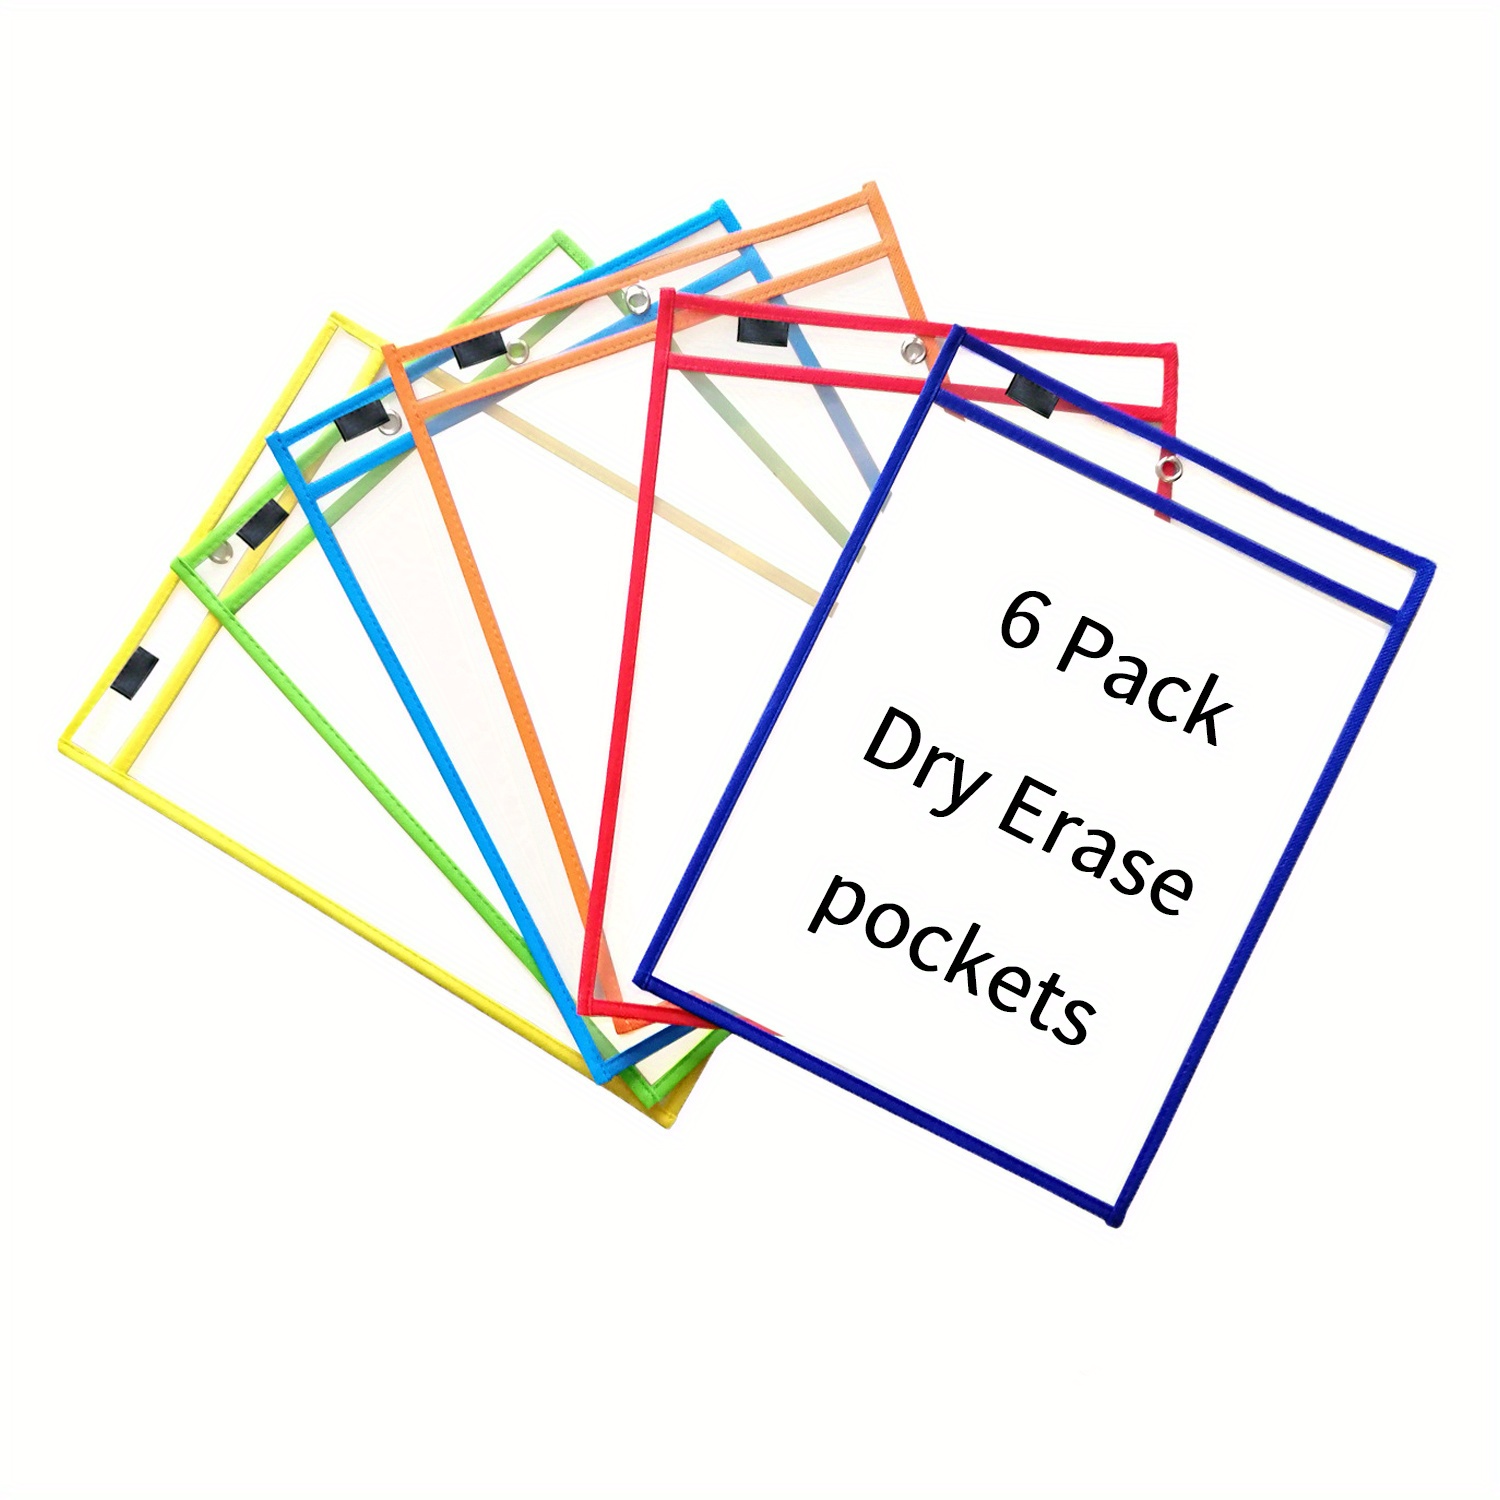 Dry Erase Pocket Sleeves With Tracing Practice Paper, 6 Pack, Reusable  Sheet Protectors for Home, Office, Classroom Organization 